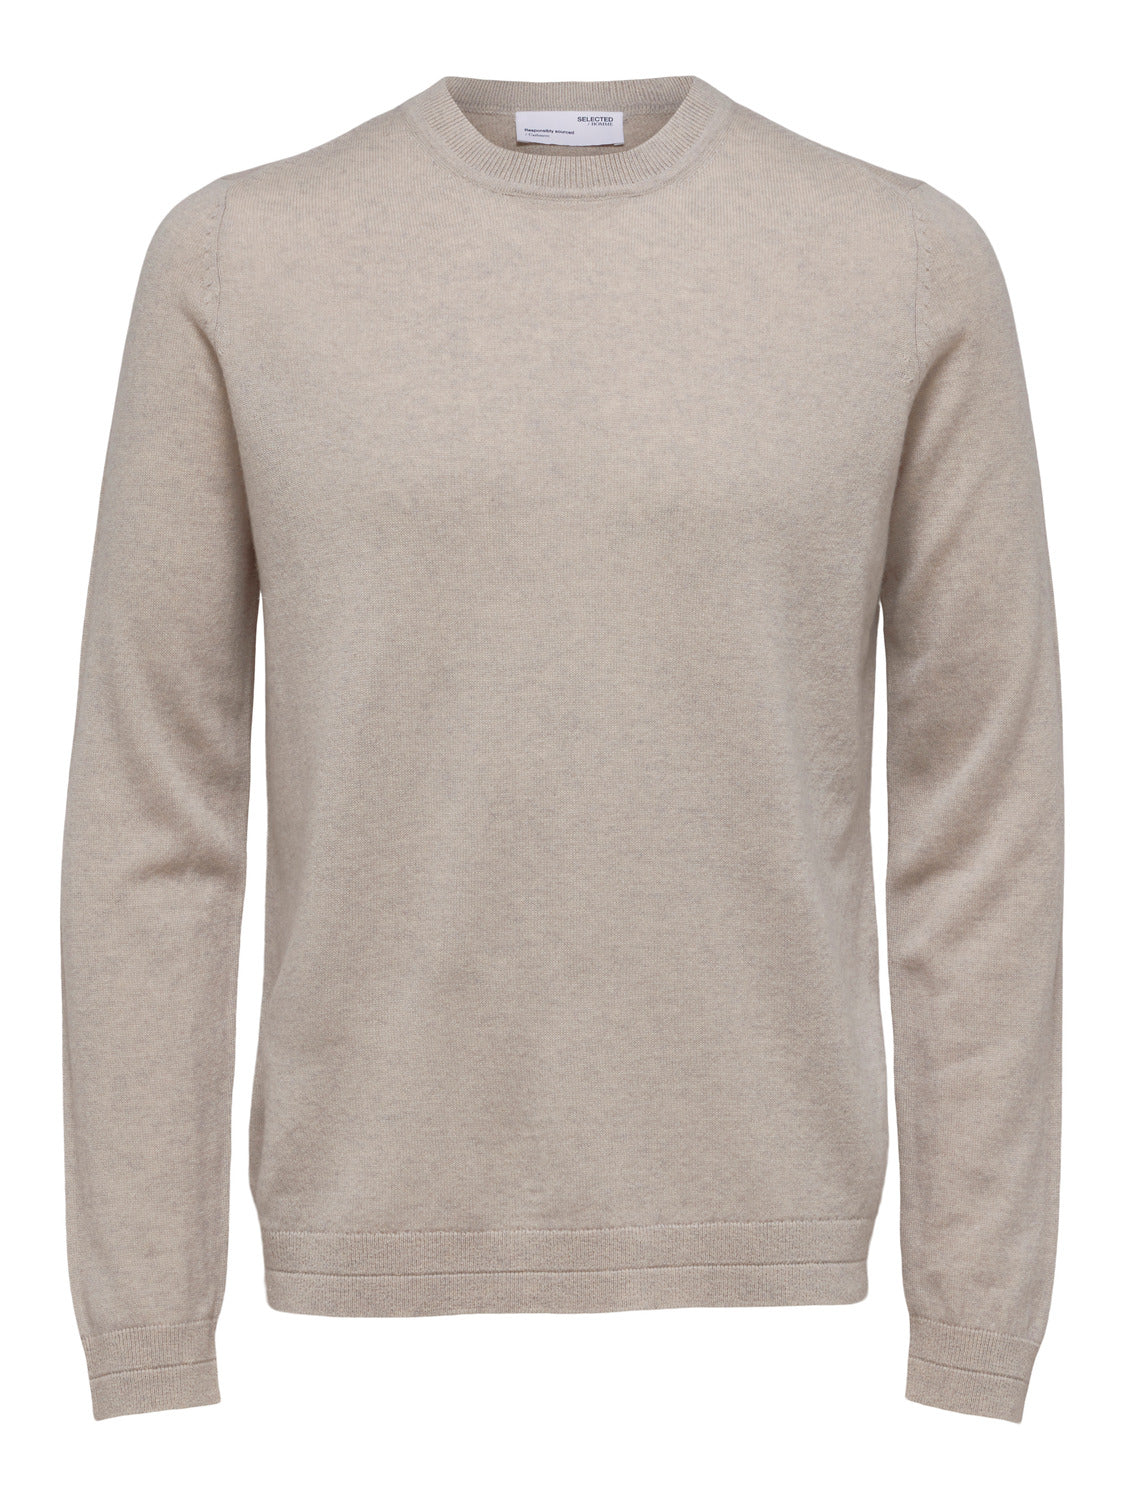 SELECTED HOMME - MAXWELL Pullover - Fog